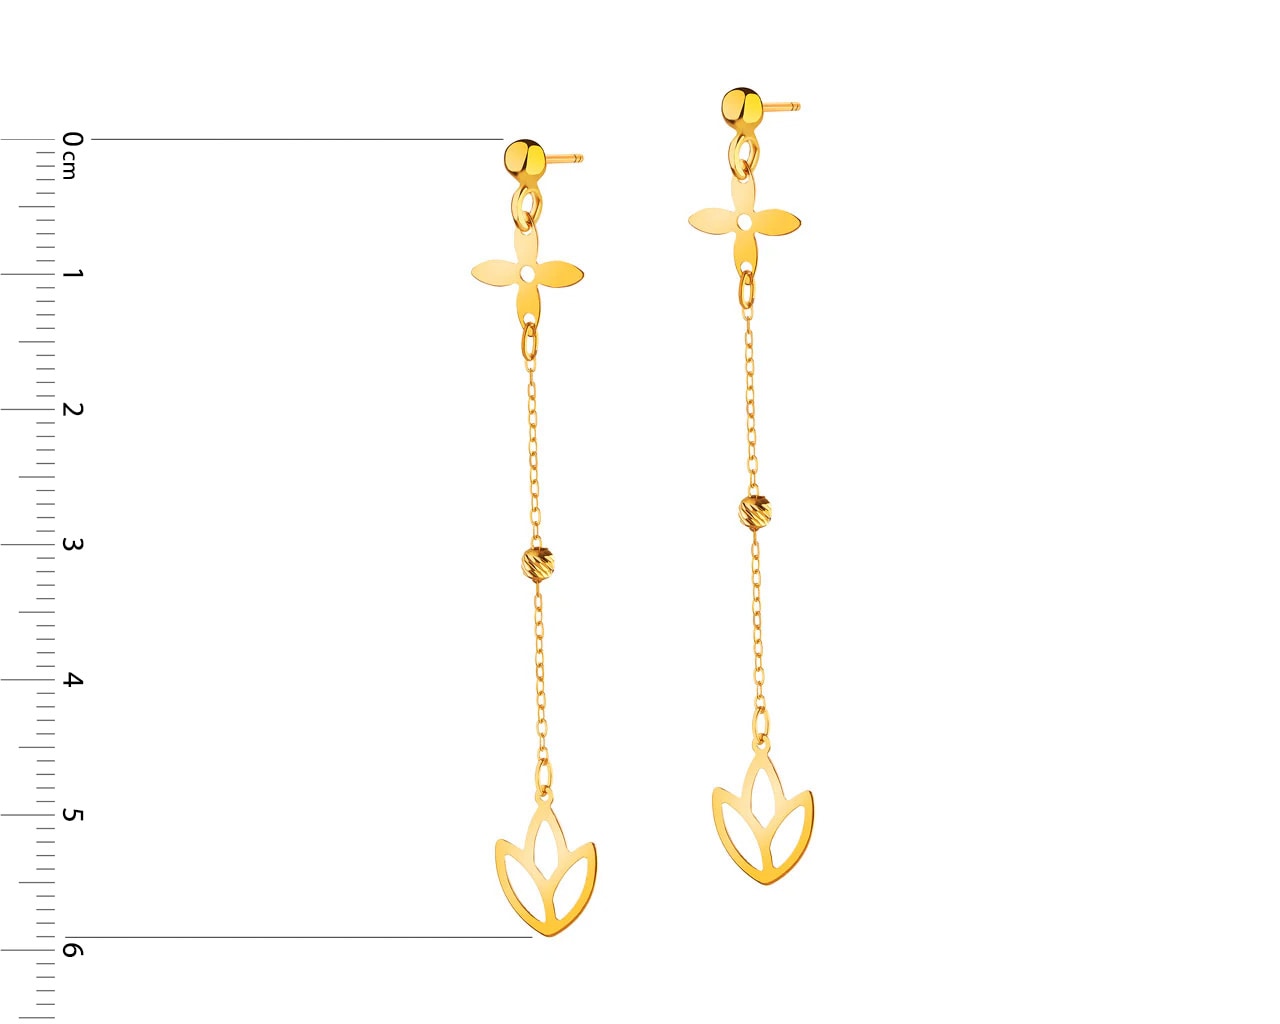 Tanishq Aari Patterned Gold Drop Earrings Price Starting From Rs 1.00 L.  Find Verified Sellers in Chandigarh - JdMart